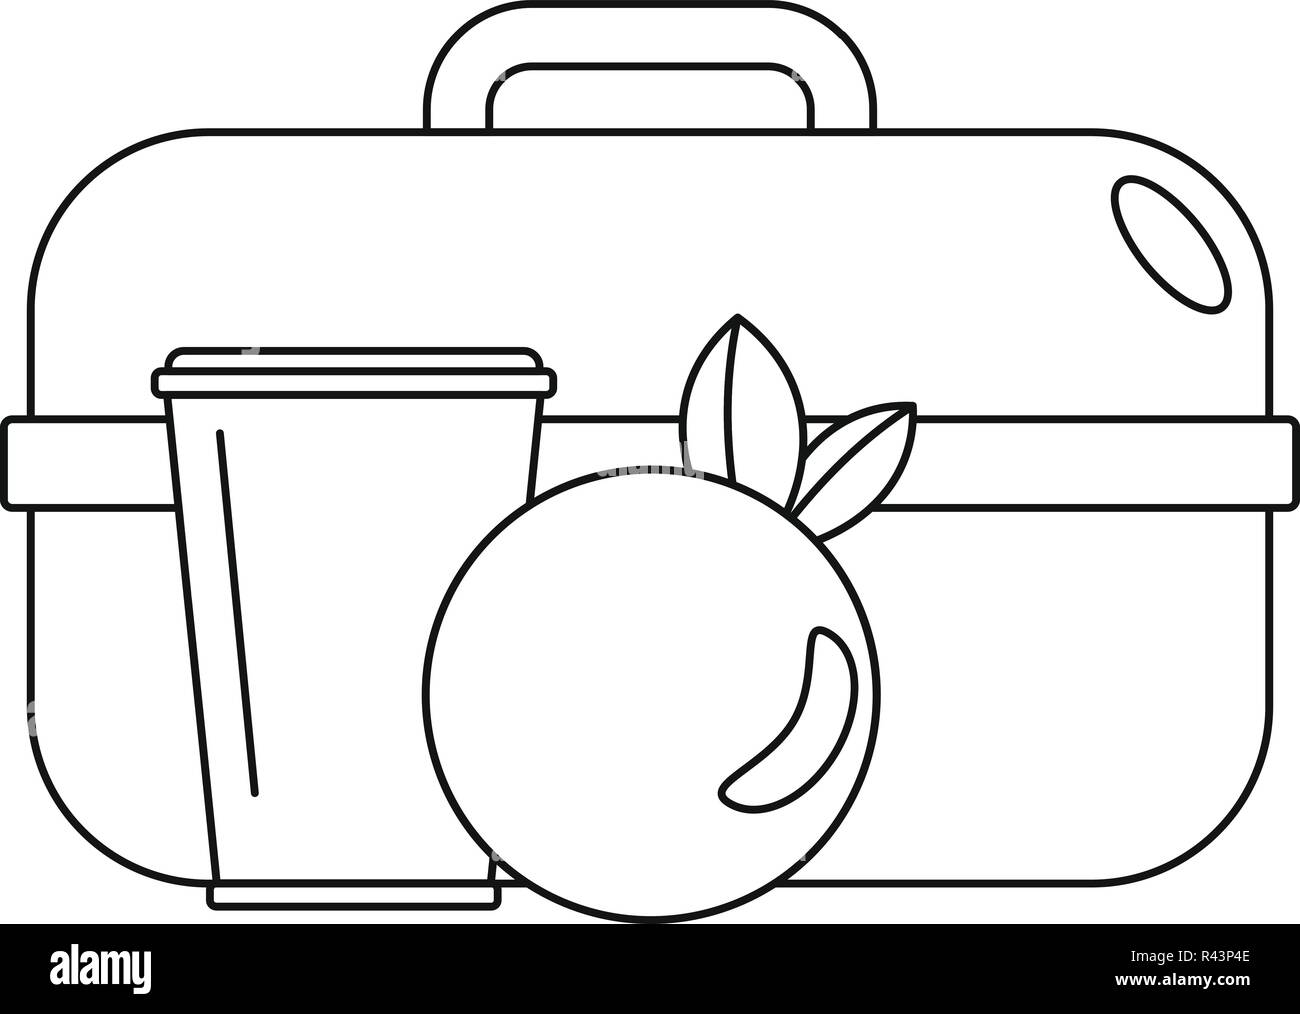 https://c8.alamy.com/comp/R43P4E/apple-lunch-box-icon-outline-illustration-of-apple-lunch-box-vector-icon-for-web-design-isolated-on-white-background-R43P4E.jpg